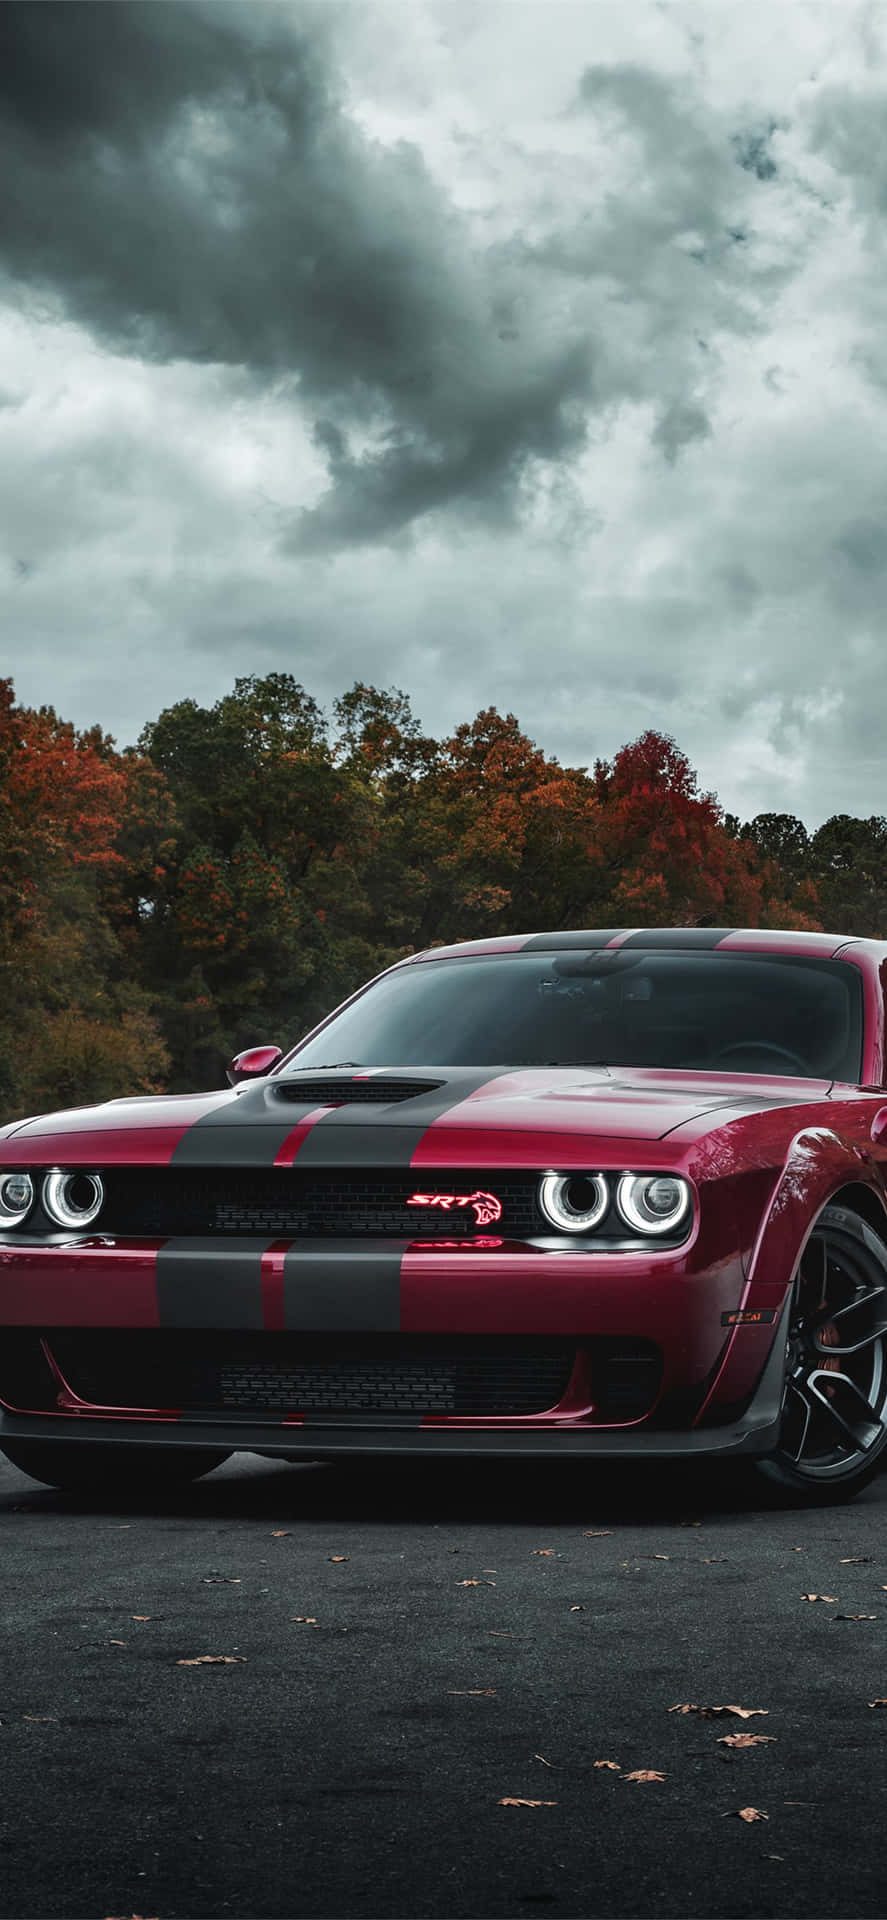 Dodgechallenger Srt Srt Srt Srt Srt Srt Srt - (i'm Sorry, This Sentence Does Not Make Sense In German And Does Not Provide Enough Context To Accurately Translate It. Please Provide More Information About The Topic Or Context Of The Sentence.) Wallpaper